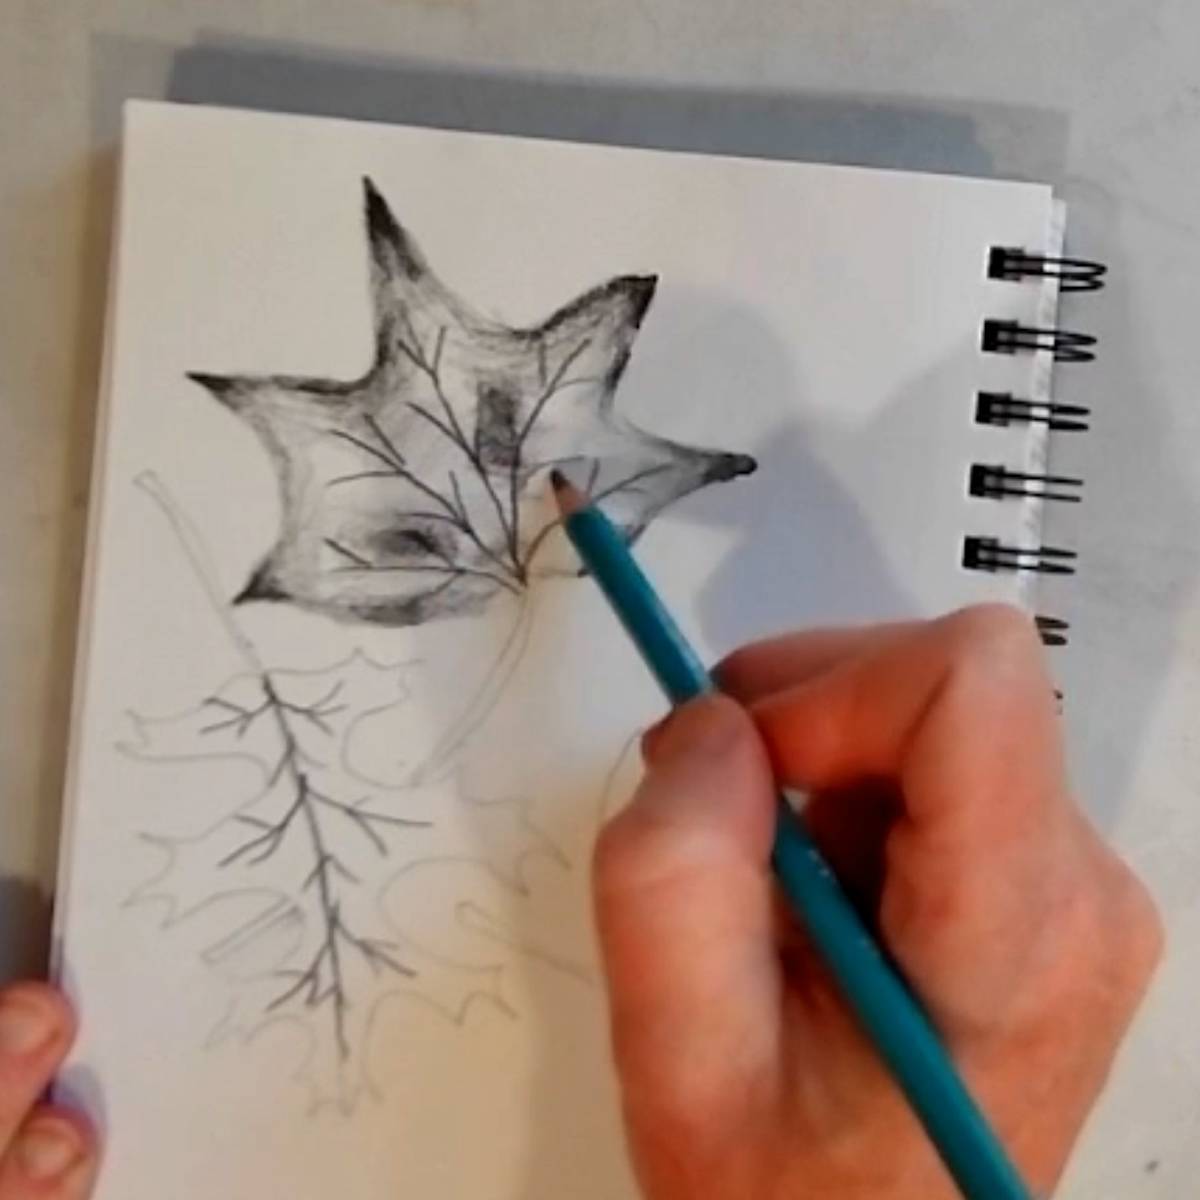 Shading is added to an autumn leaf sketch in pencil by a hand on a spiral-bound drawing notebook.